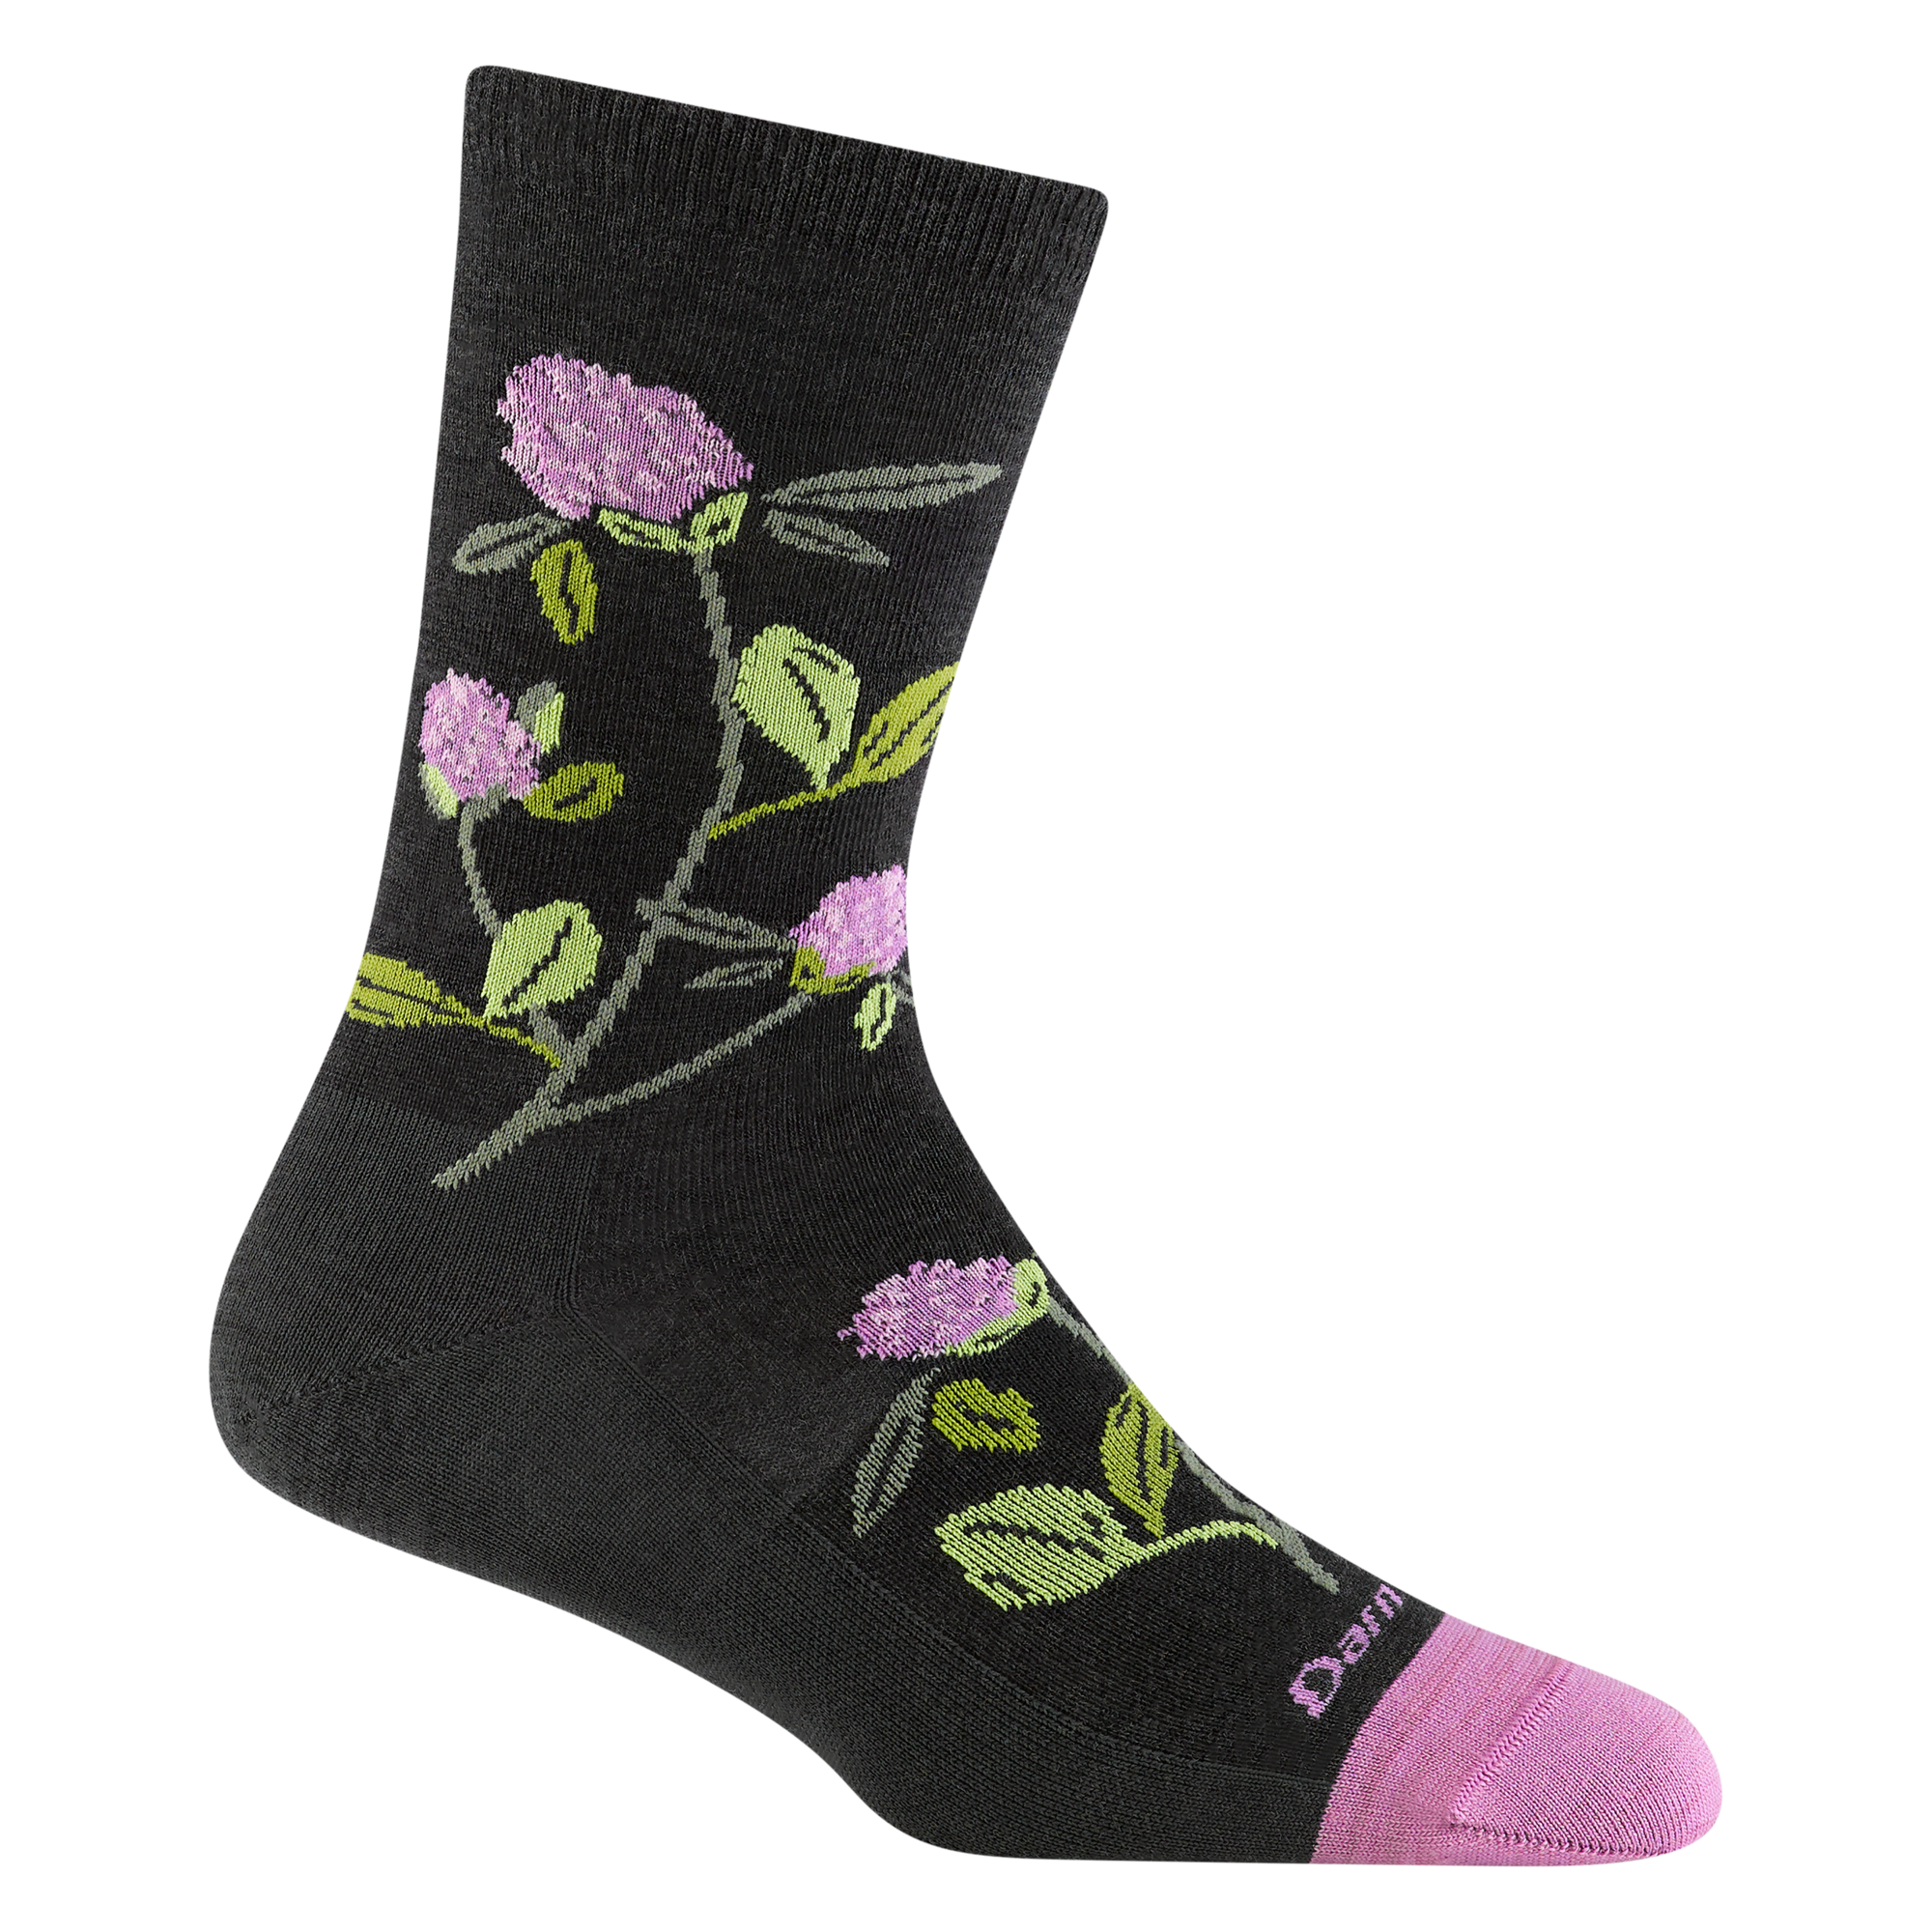 6104 women's blossom crew lifestyle socks in charcoal with pik toe accent and pink and green flower details